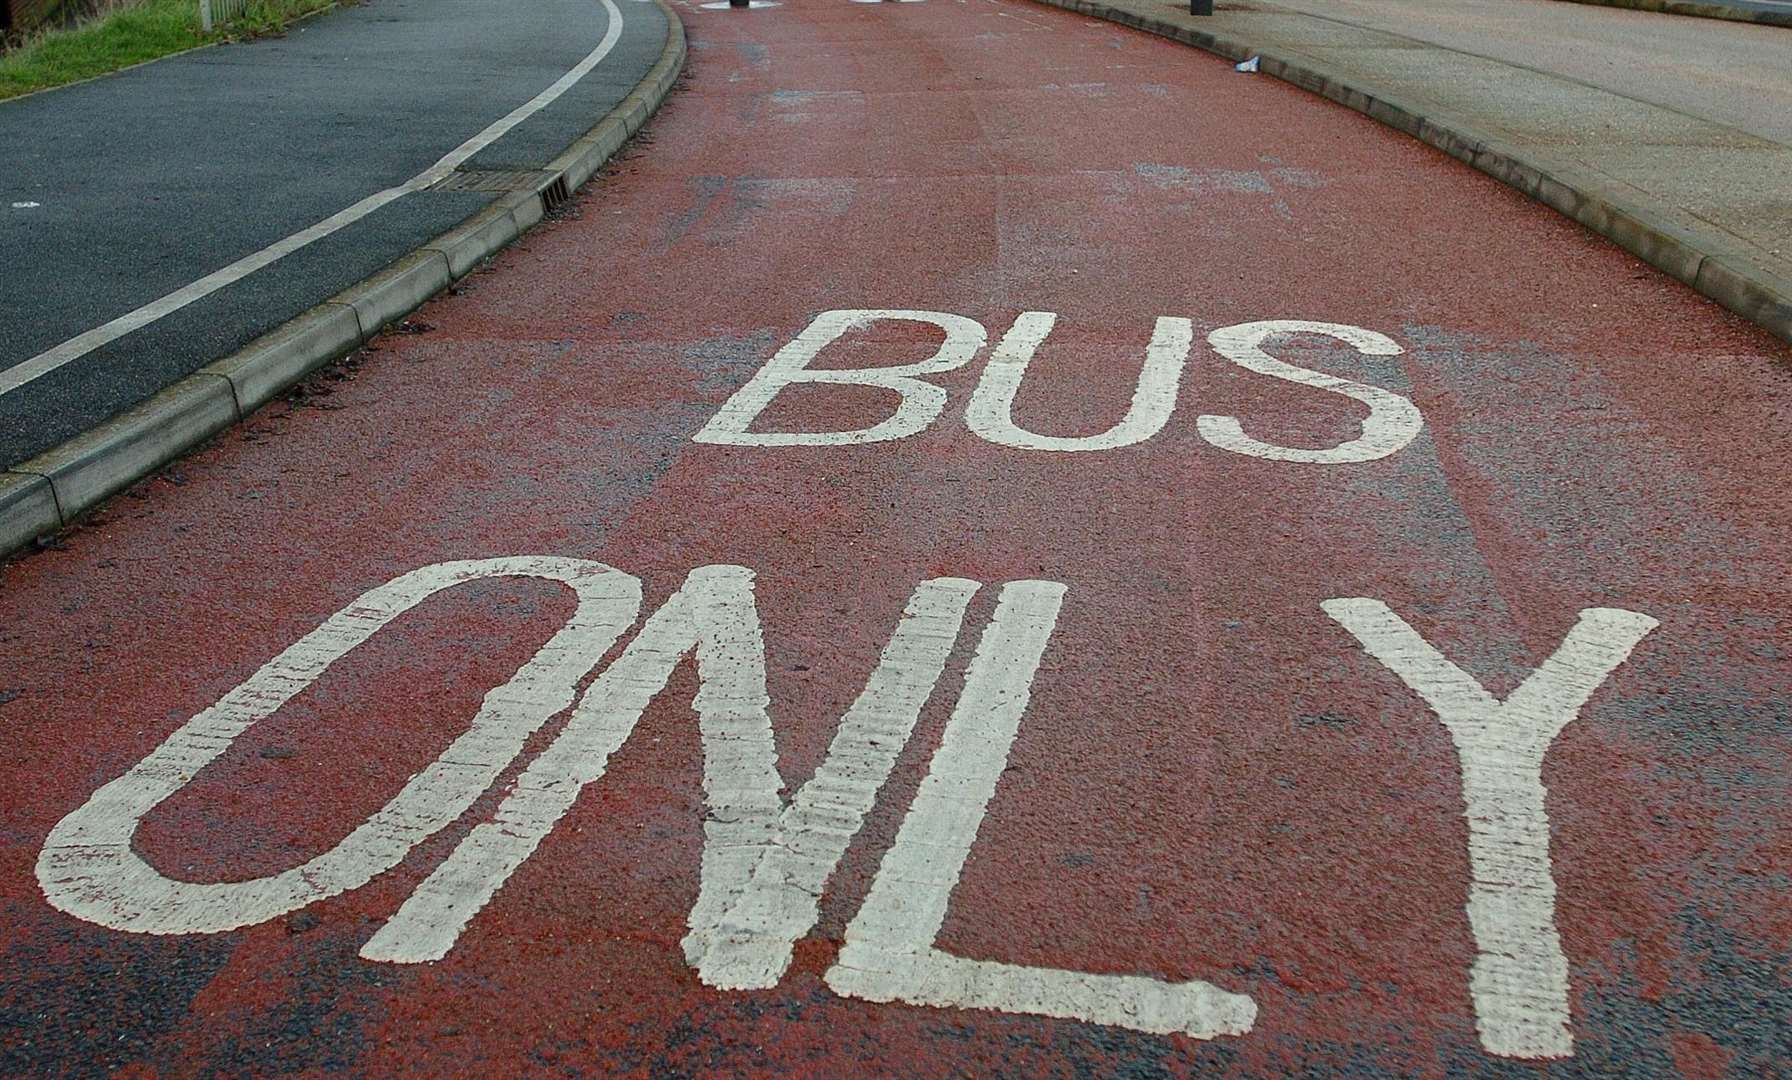 Those behind the suggestion say bus lanes are often empty. Image: Stock image.